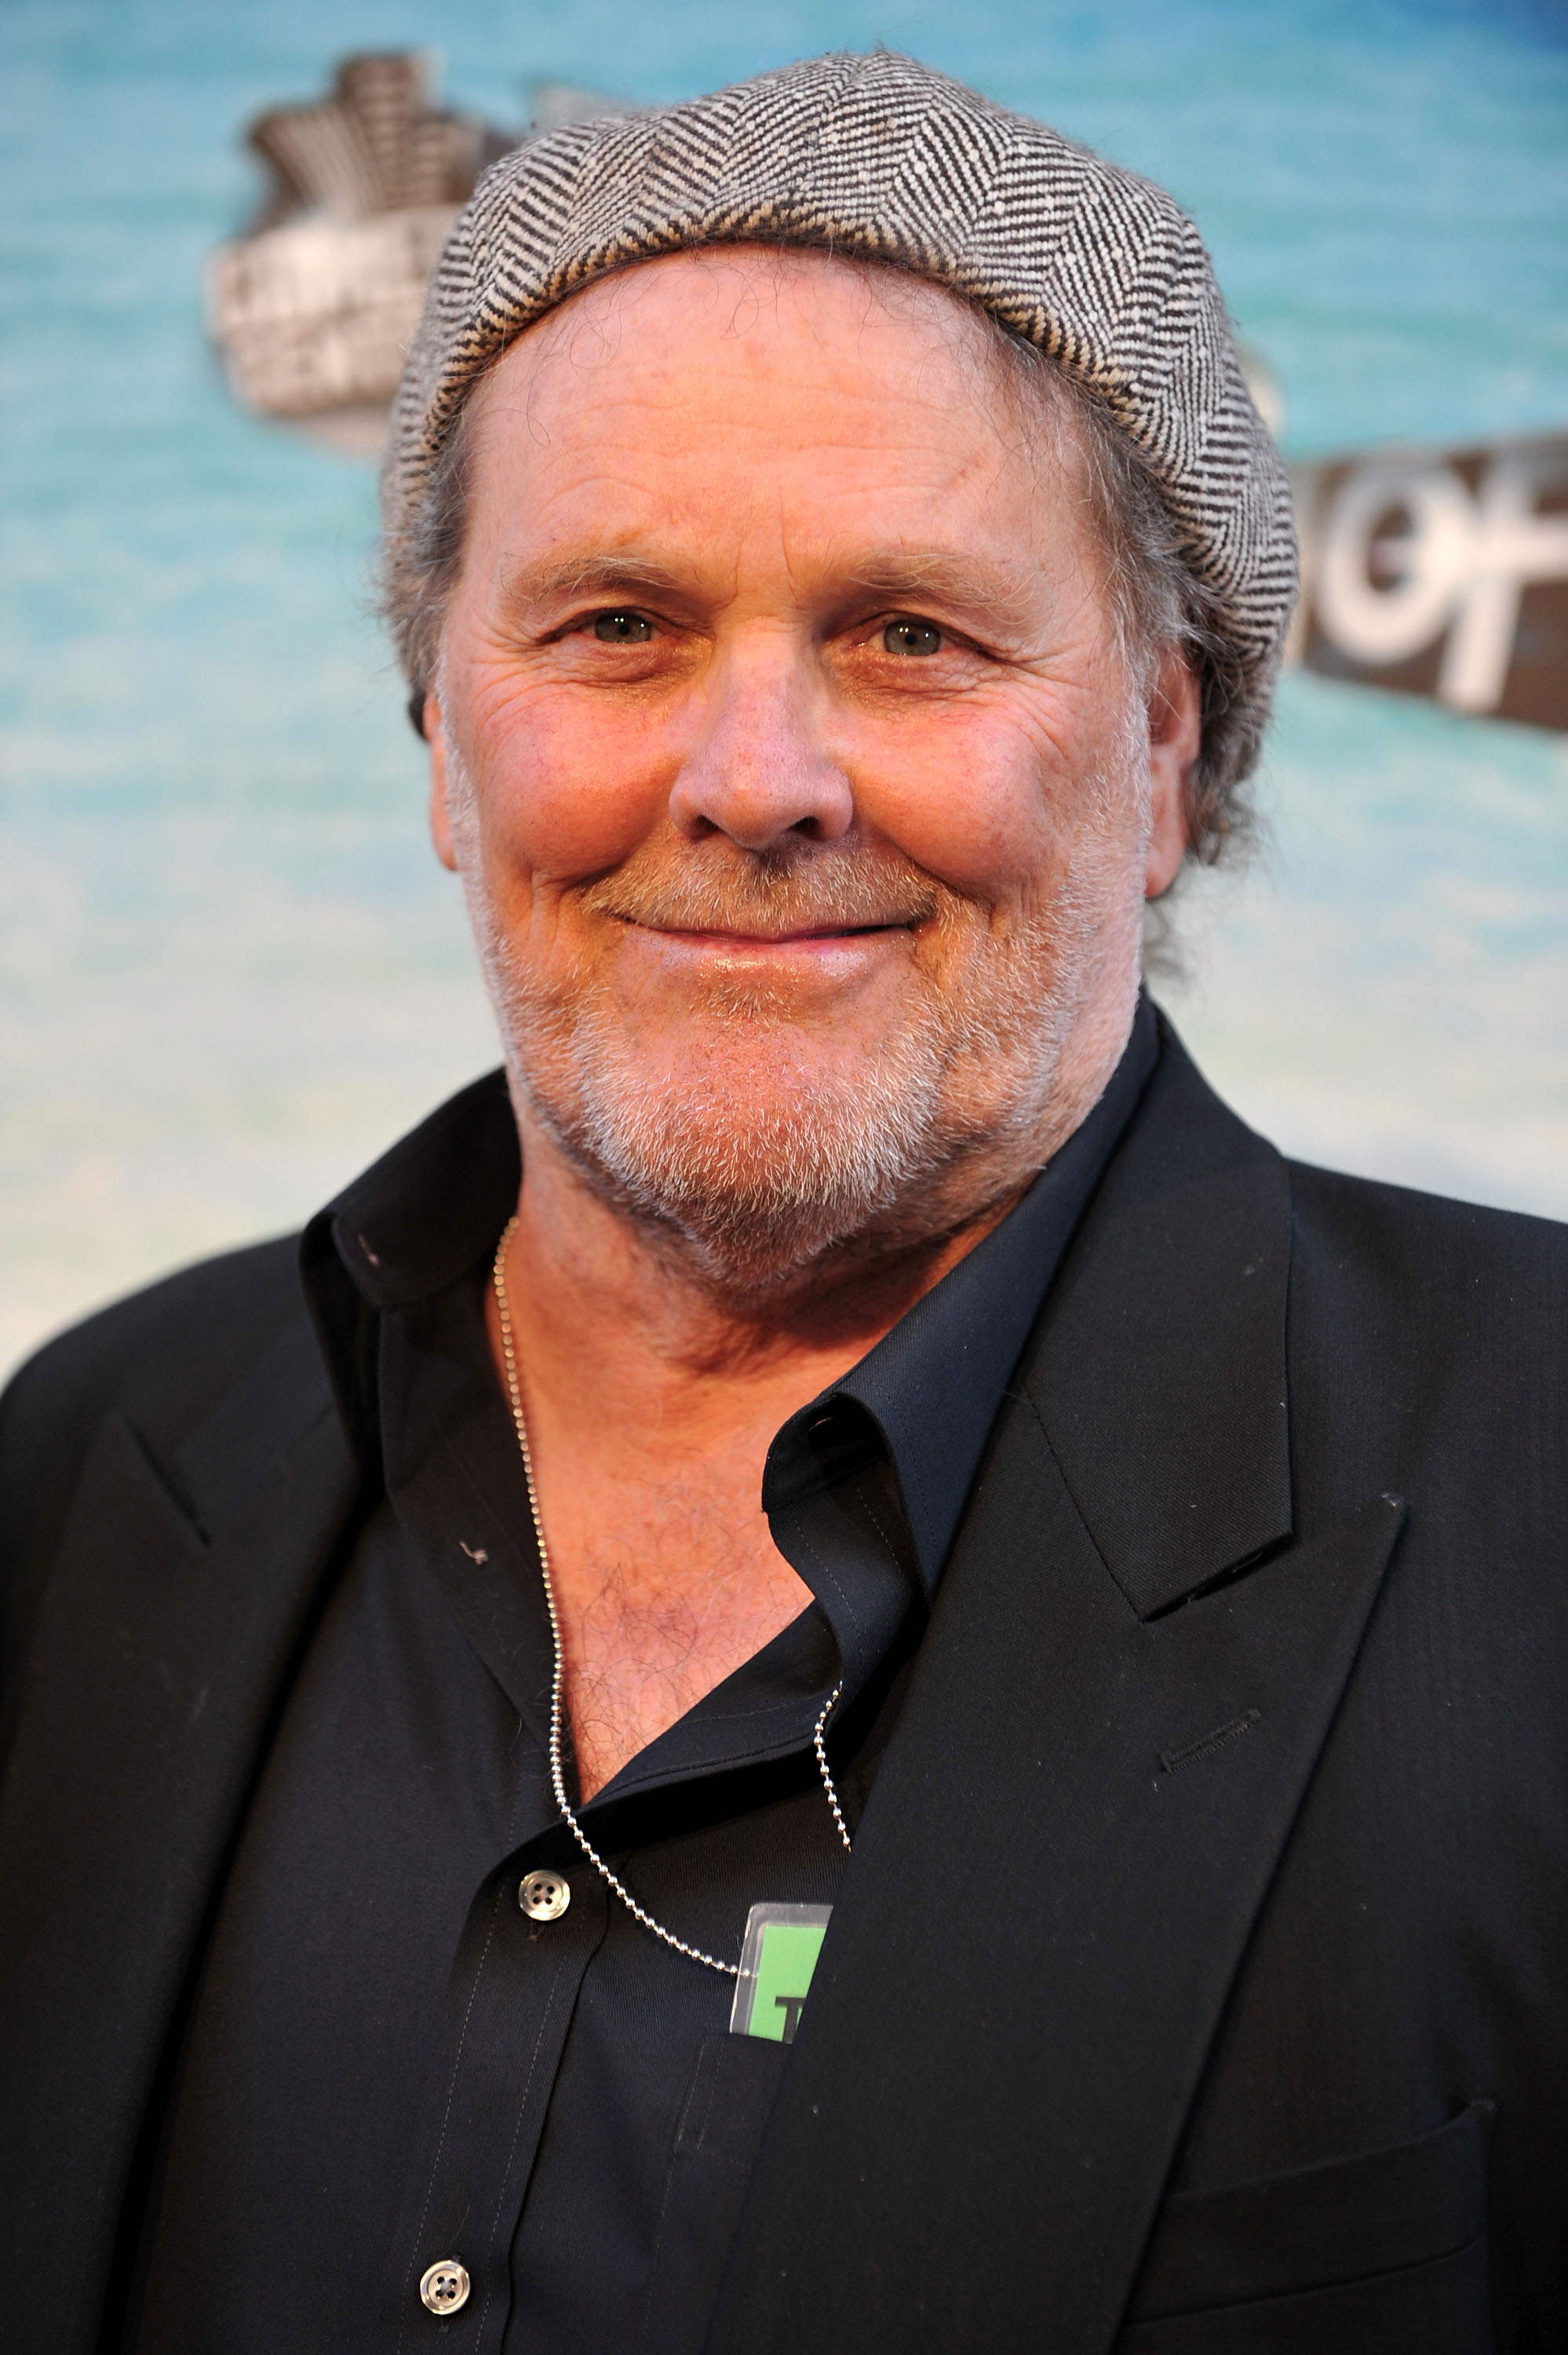 Wings Hauser in Los Angeles in 2010 | Source: Getty Images